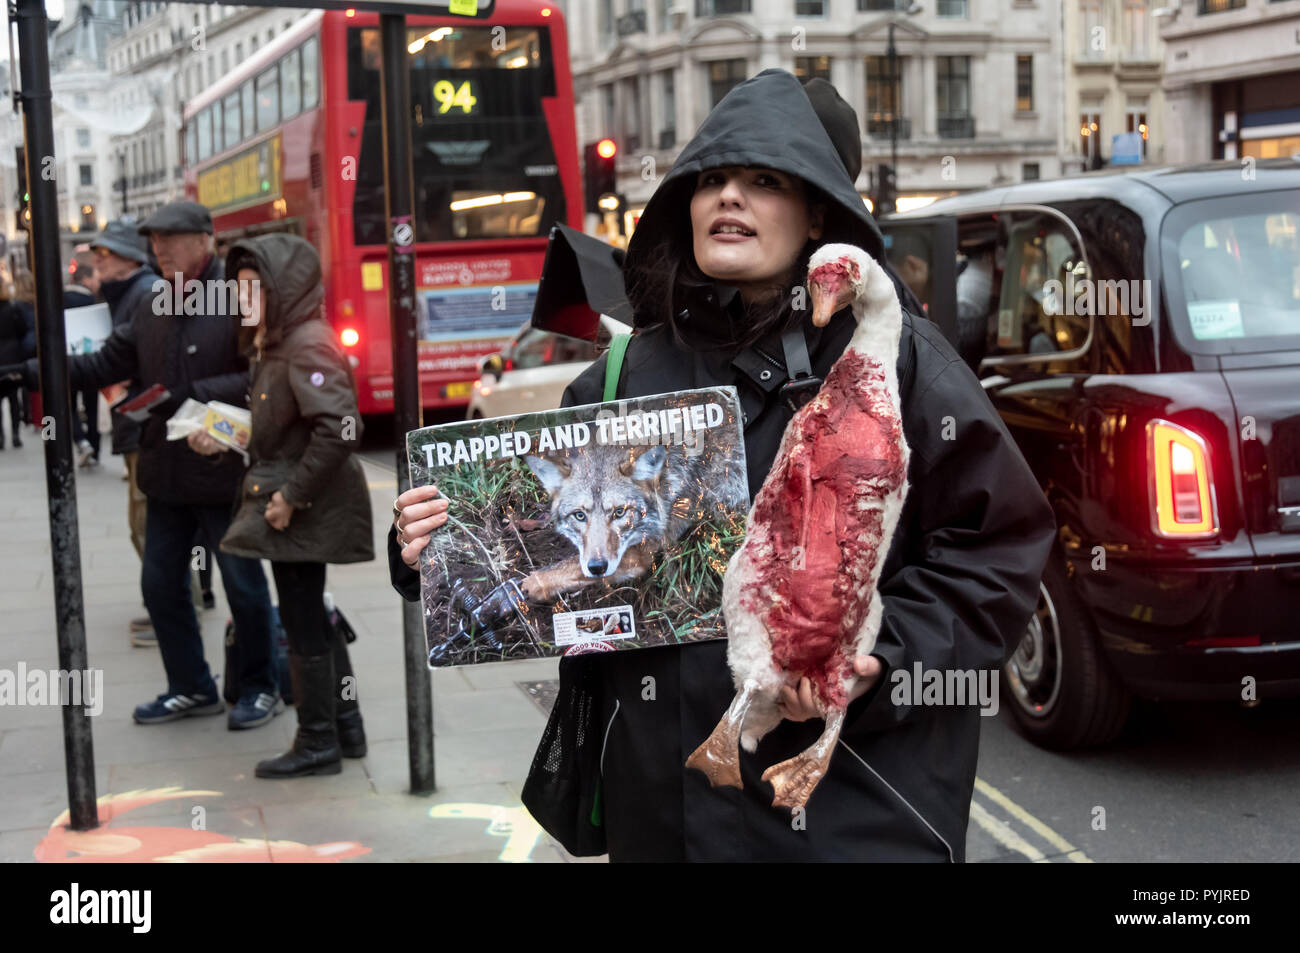 London, UK. 27 October 2018. Campaigners show videos and hand out leaflets  against animal cruelty outside the Regent St London flagship store of Canada  Goose, which campaigners say has cruelty to animals